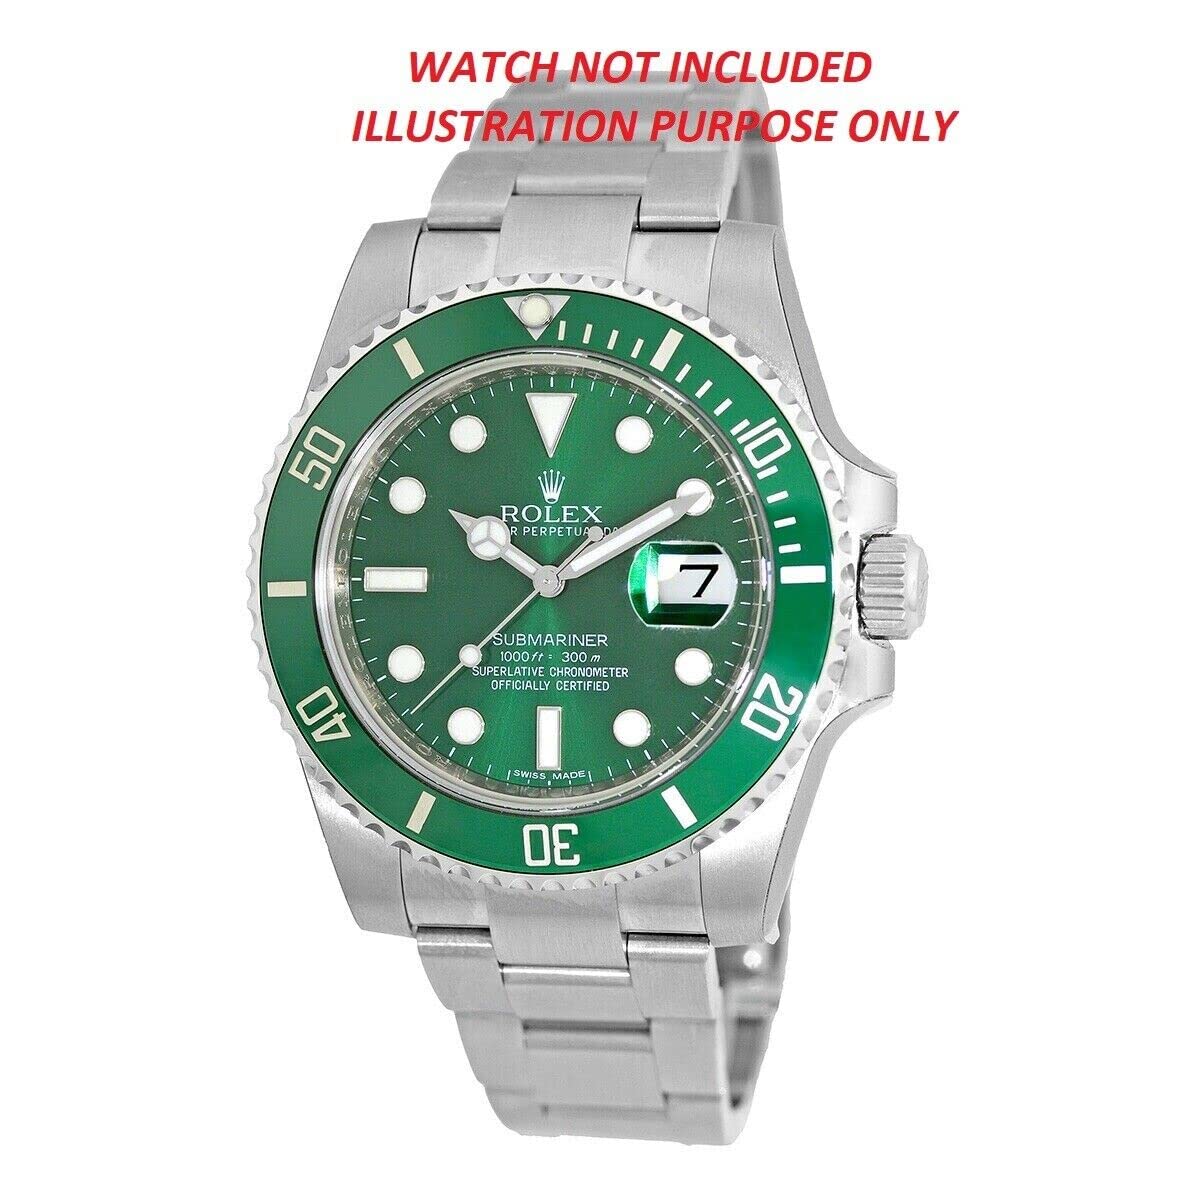 Ewatchparts PEARL PIP DOT COMPATIBLE WITH BEZEL INSERT ROLEX SUBMARINER CERAMIC 116610LV HULK BLUE LUME